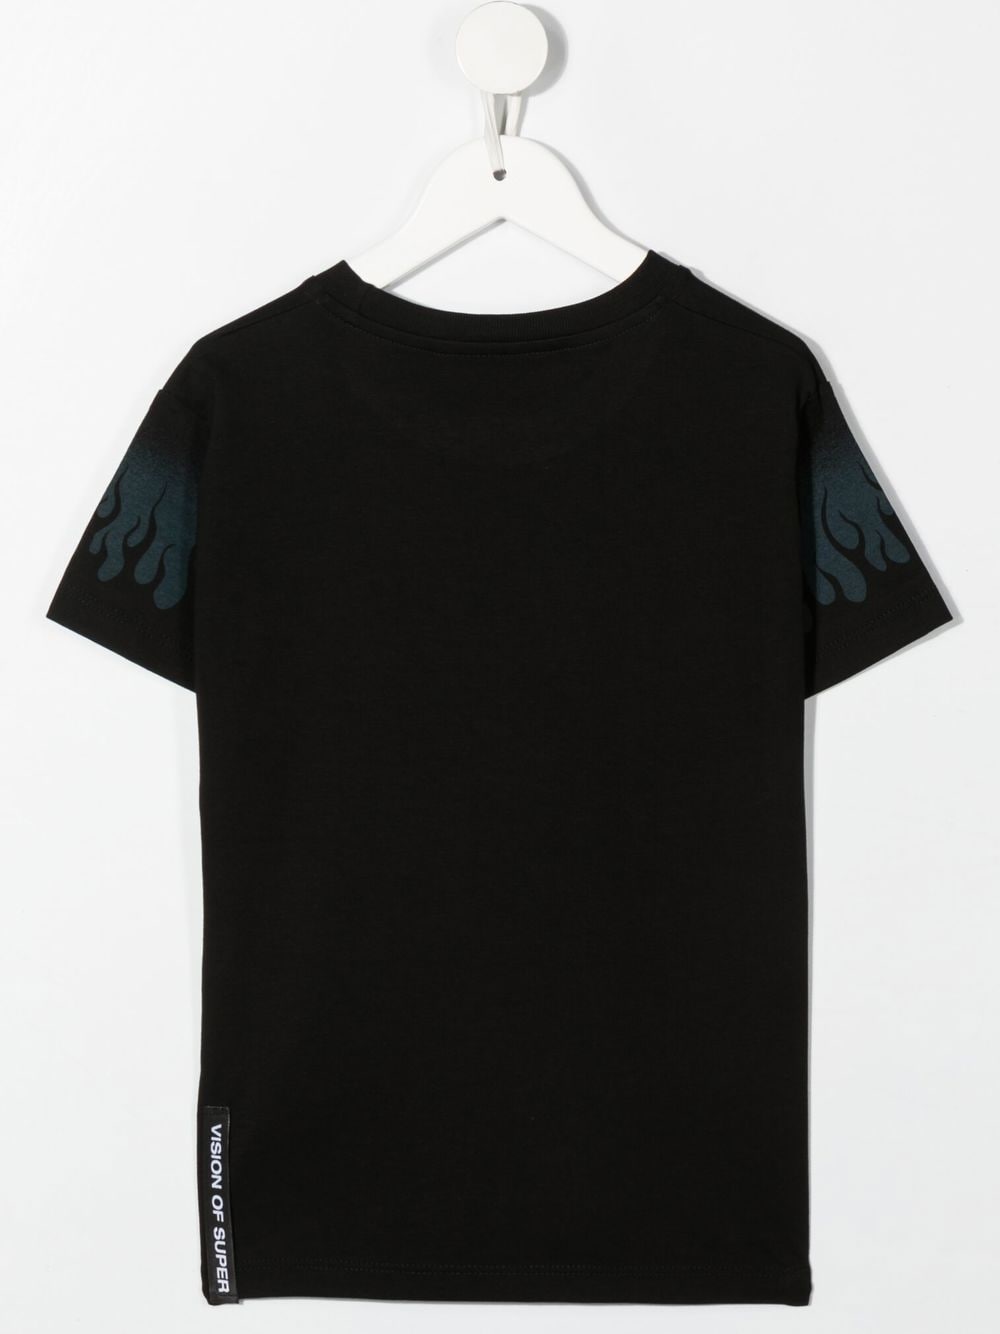 BLACK T-SHIRT WITH NEGATIVE BALSAM GREEN FLAMES